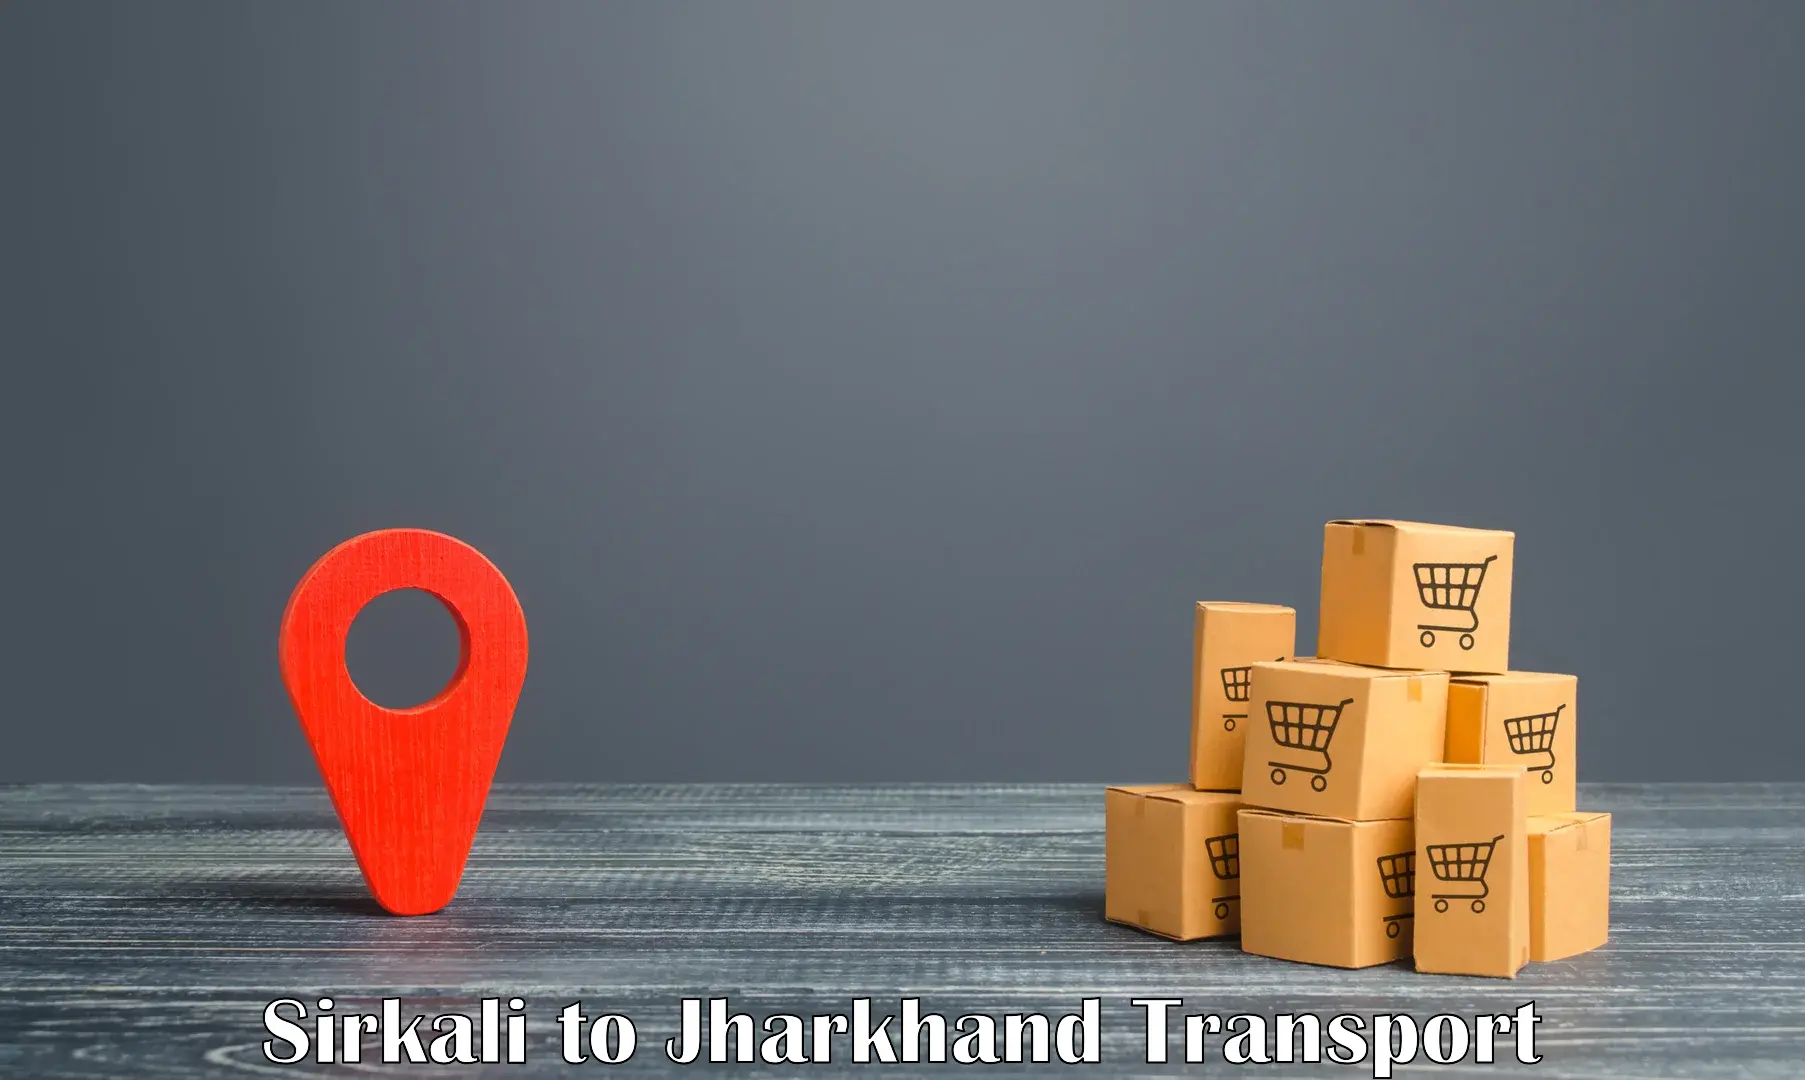 Cycle transportation service Sirkali to Jharkhand